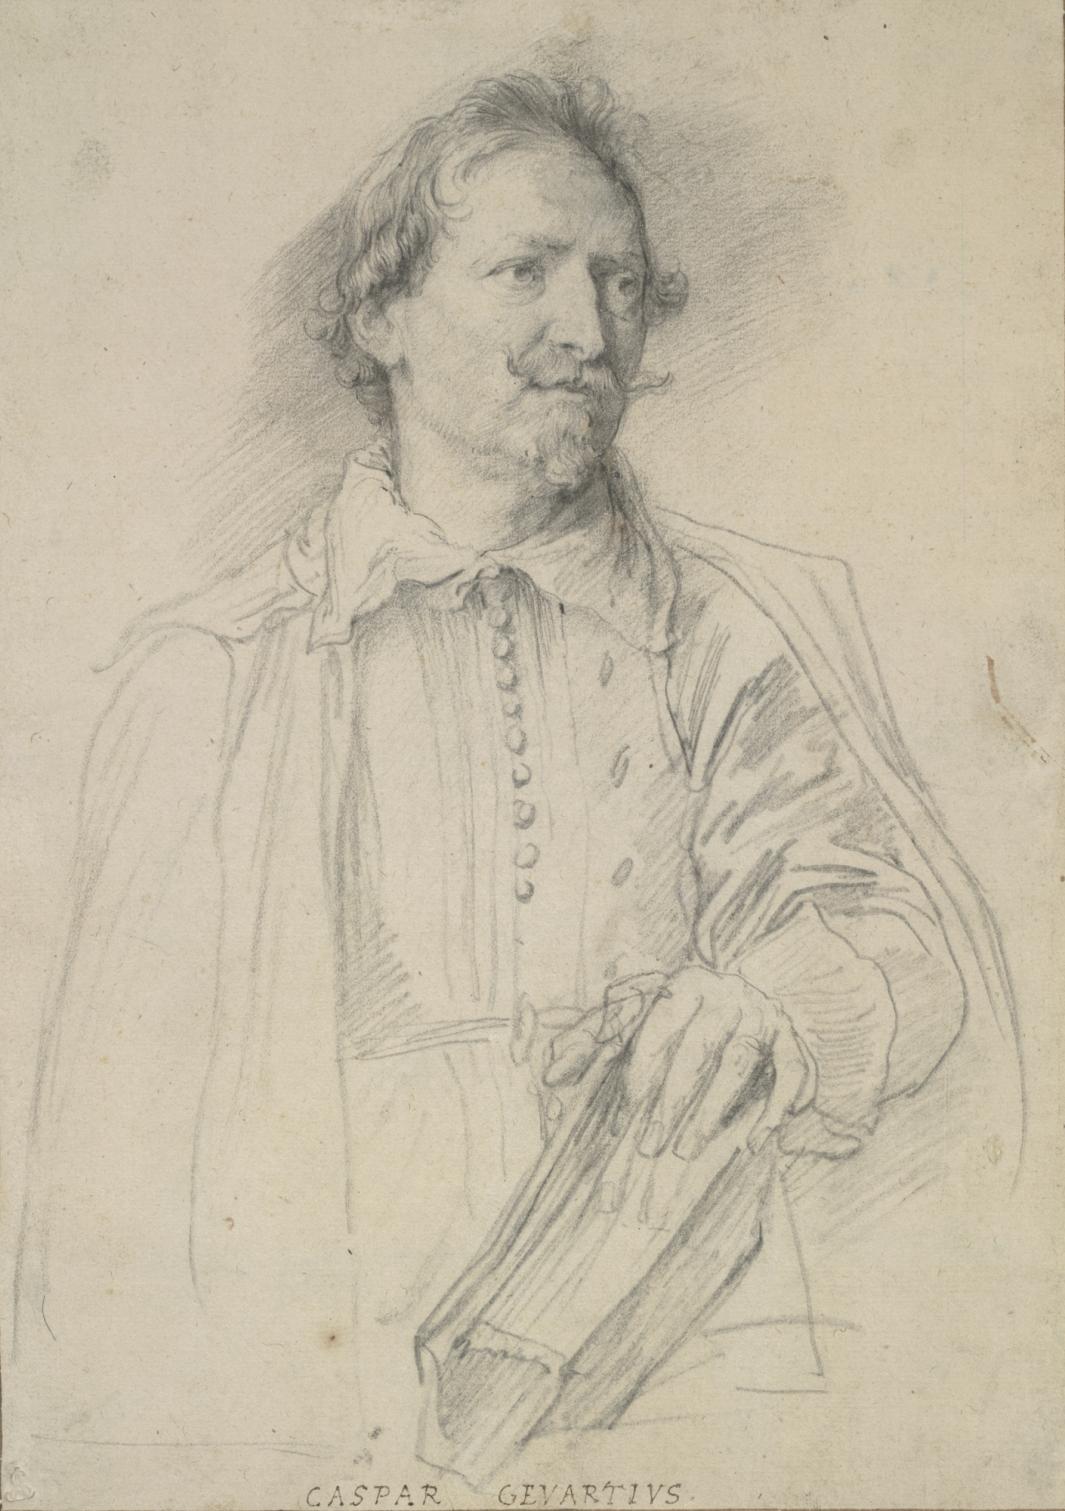 black chalk drawing of man looking left, wearing buttoned shirt, with hand on book